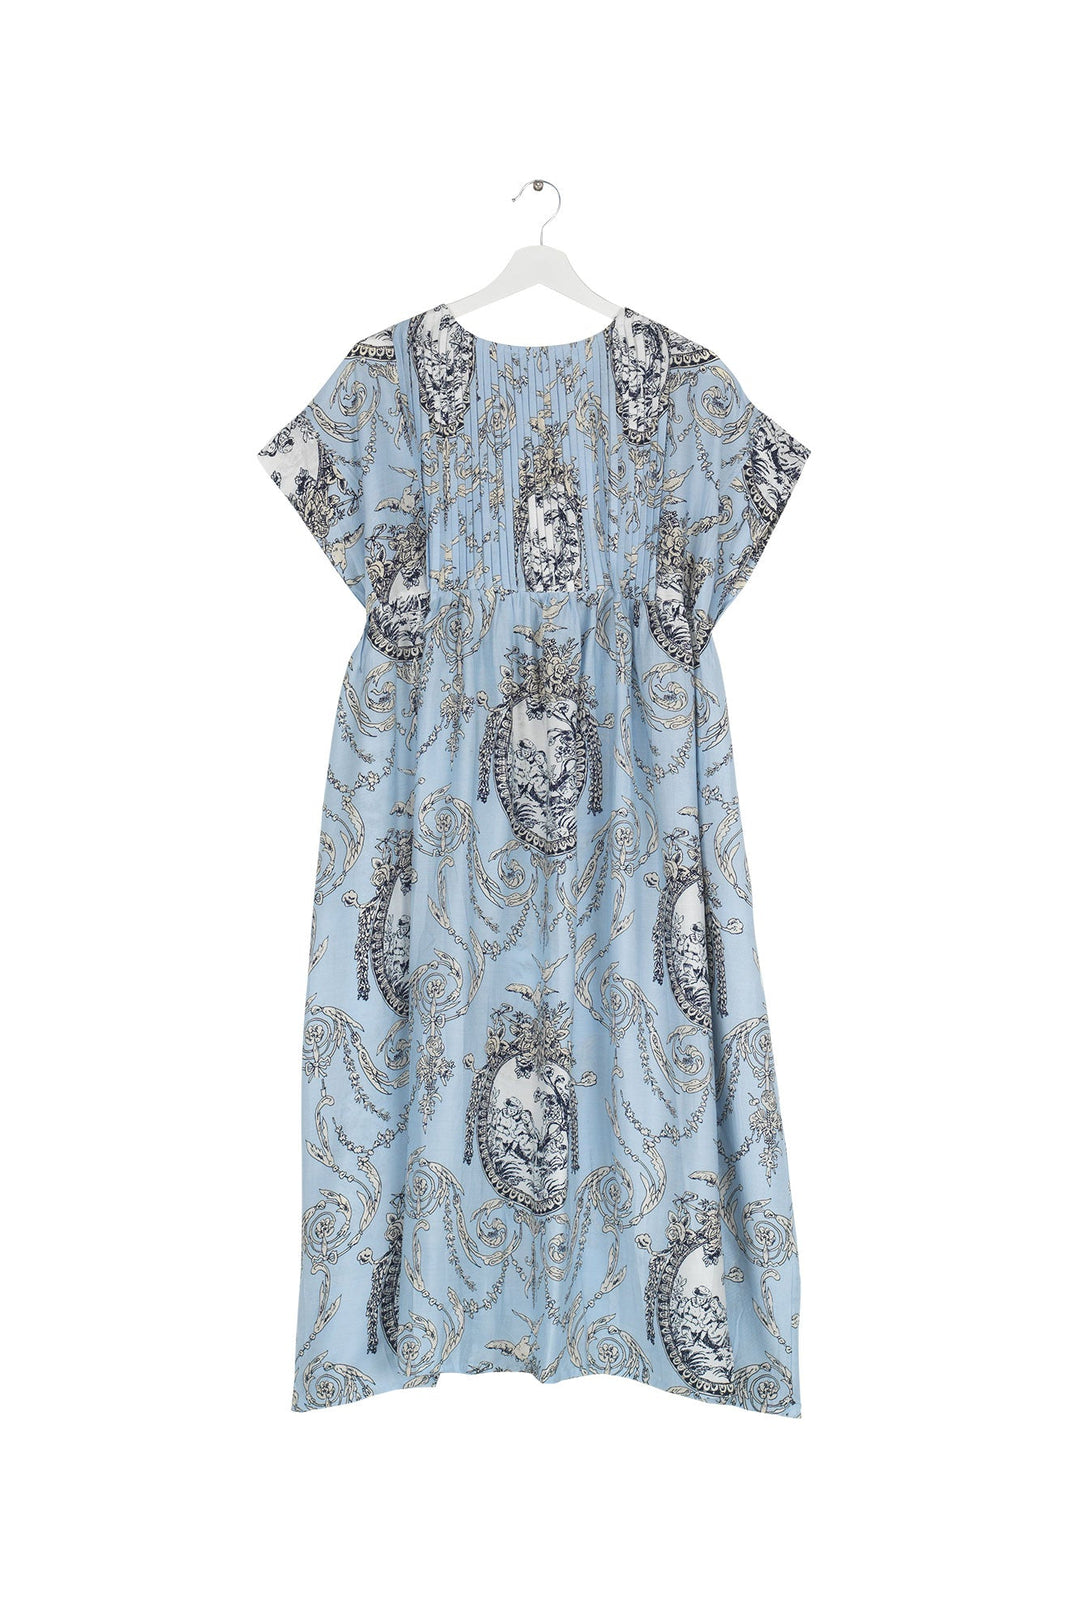 Women's short sleeve pleated dress in sky blue with valentine floral print by One Hundred Stars